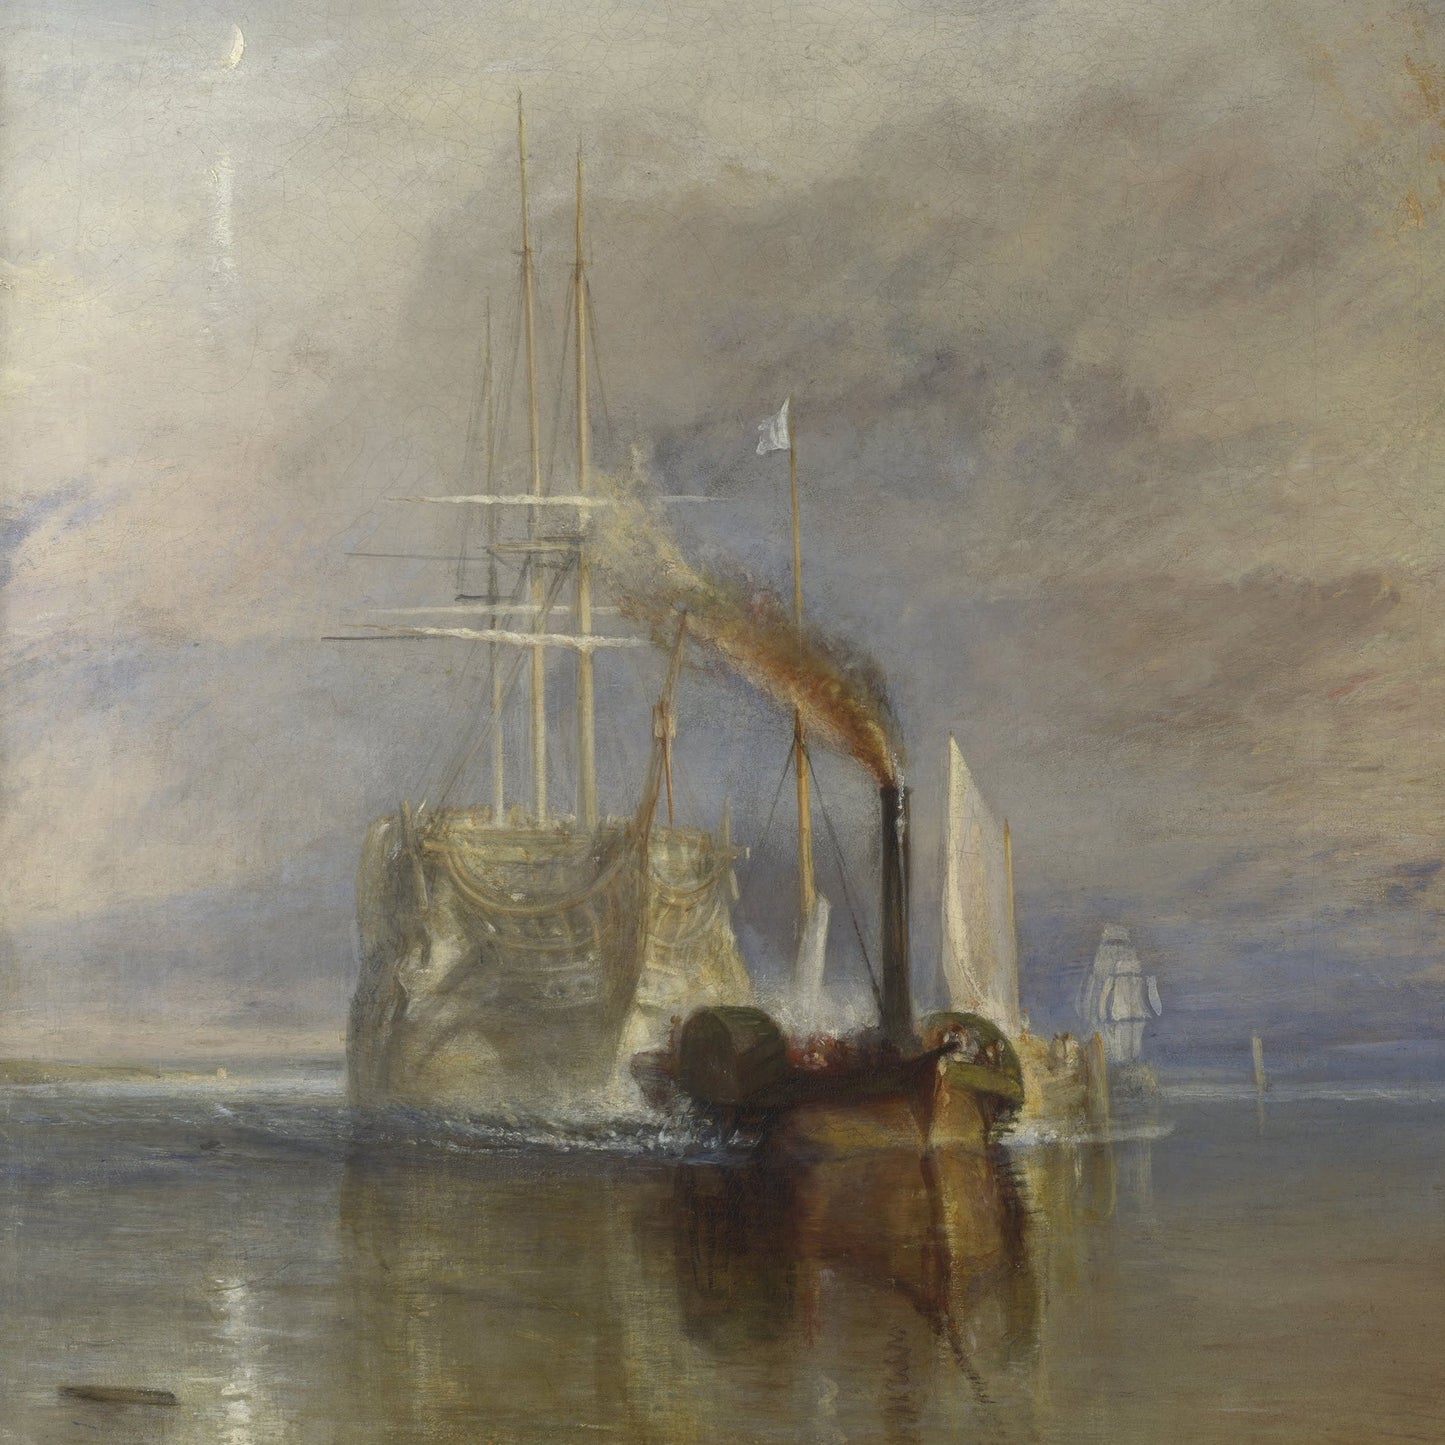 The Fighting Temeraire by J. M. W. Turner, 3d Printed with texture and brush strokes looks like original oil-painting, code:191